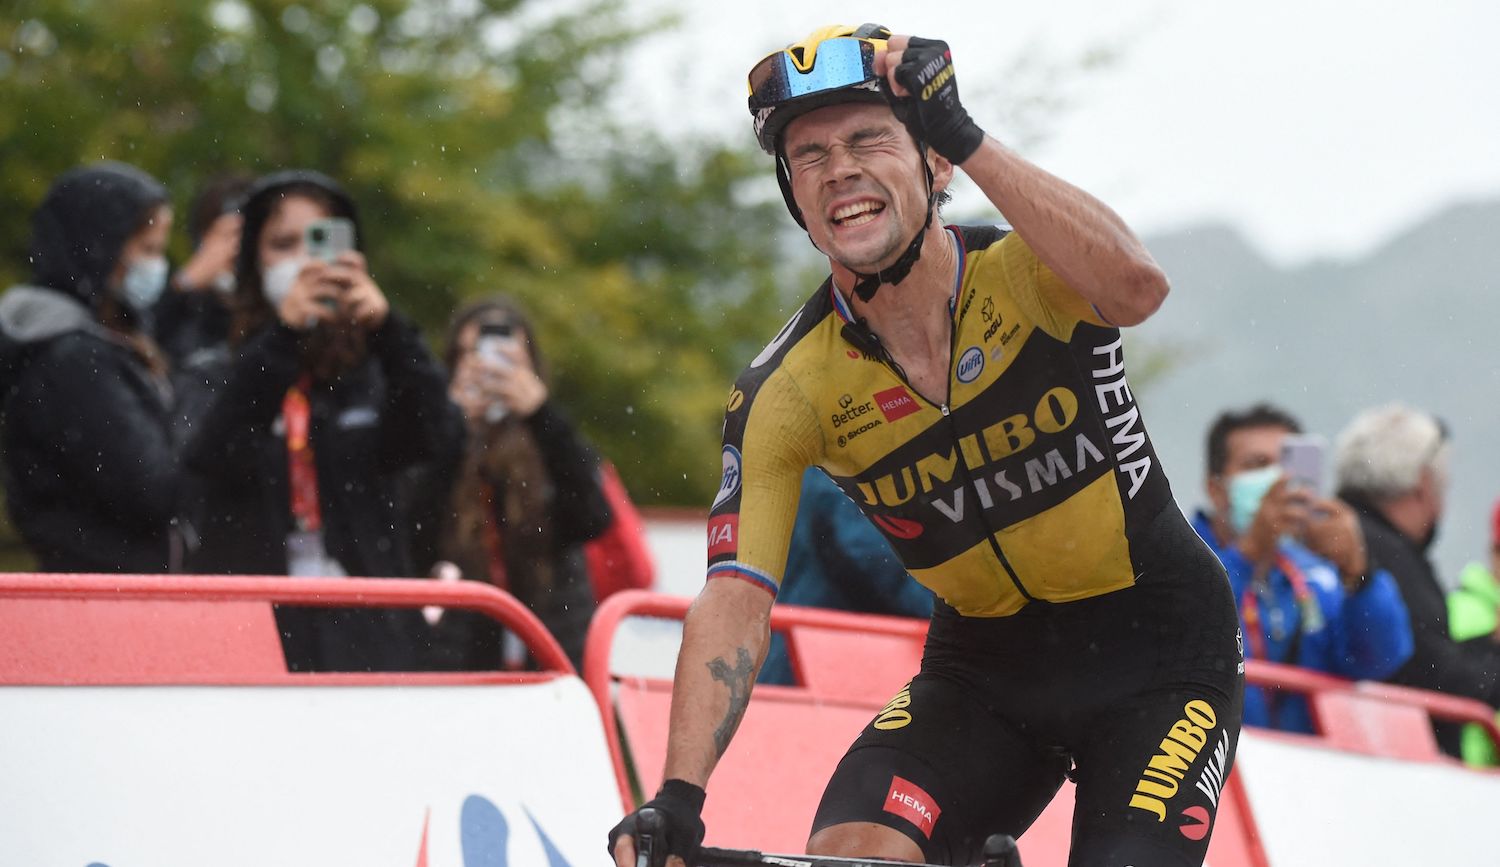 Team Jumbo's Slovenian rider Primoz Roglic celebrates as he wins the 17th stage of the 2021 La Vuelta cycling tour of Spain, a 185.8 km race from Unquera to Lagos de Covadonga on September 1, 2021. (Photo by MIGUEL RIOPA / AFP) (Photo by MIGUEL RIOPA/AFP via Getty Images)